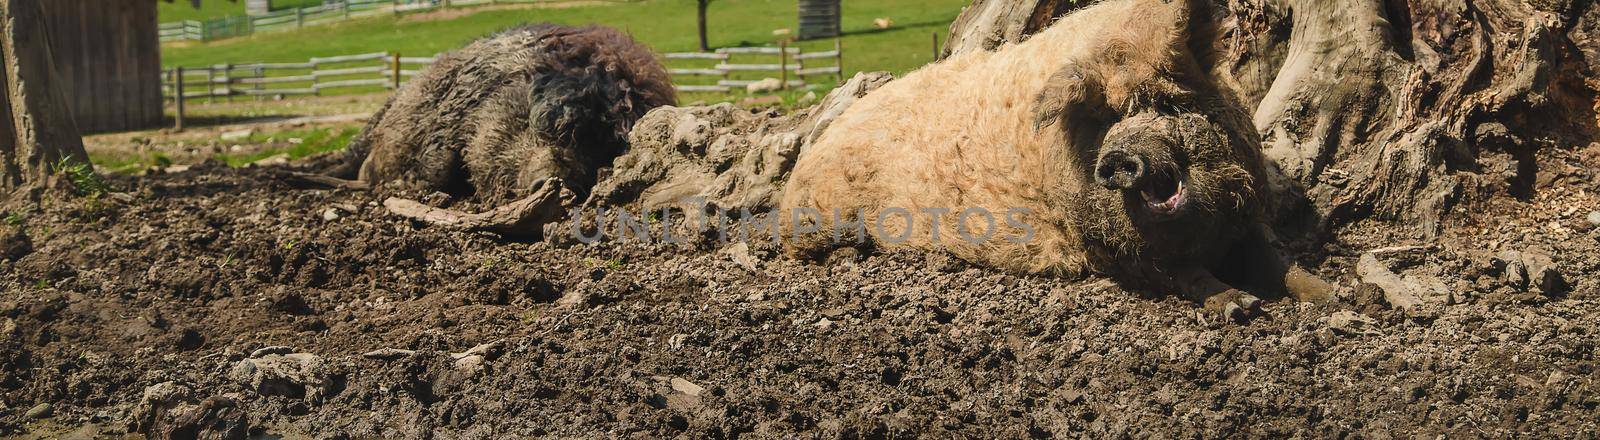 Wild boars in the mud at the farm. Selective focus. by yanadjana